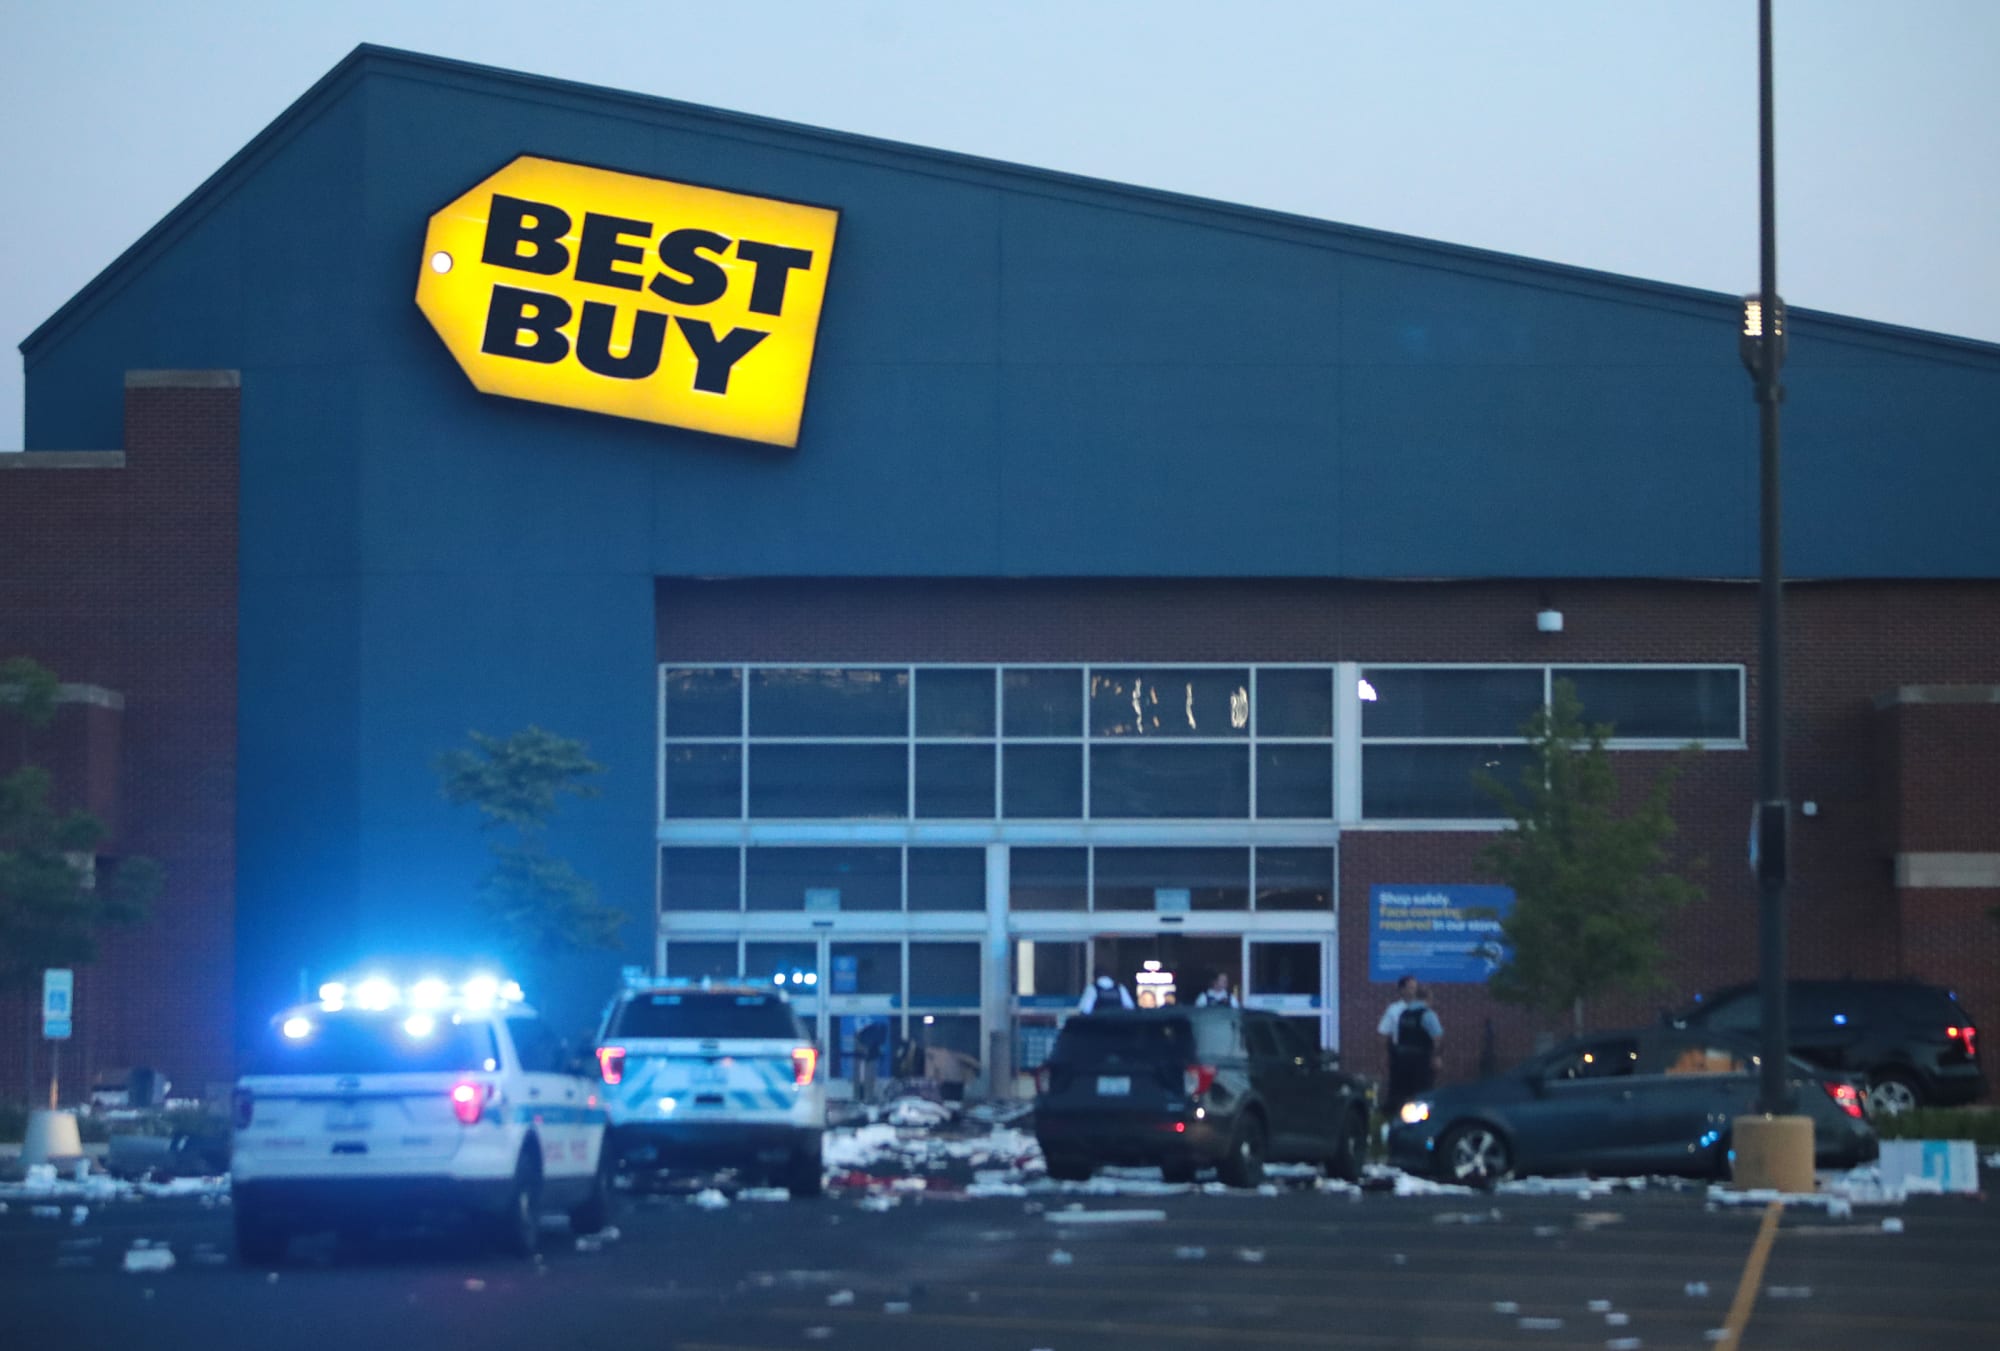 Top 10 is best buy open on christmas eve That Will Change Your Life